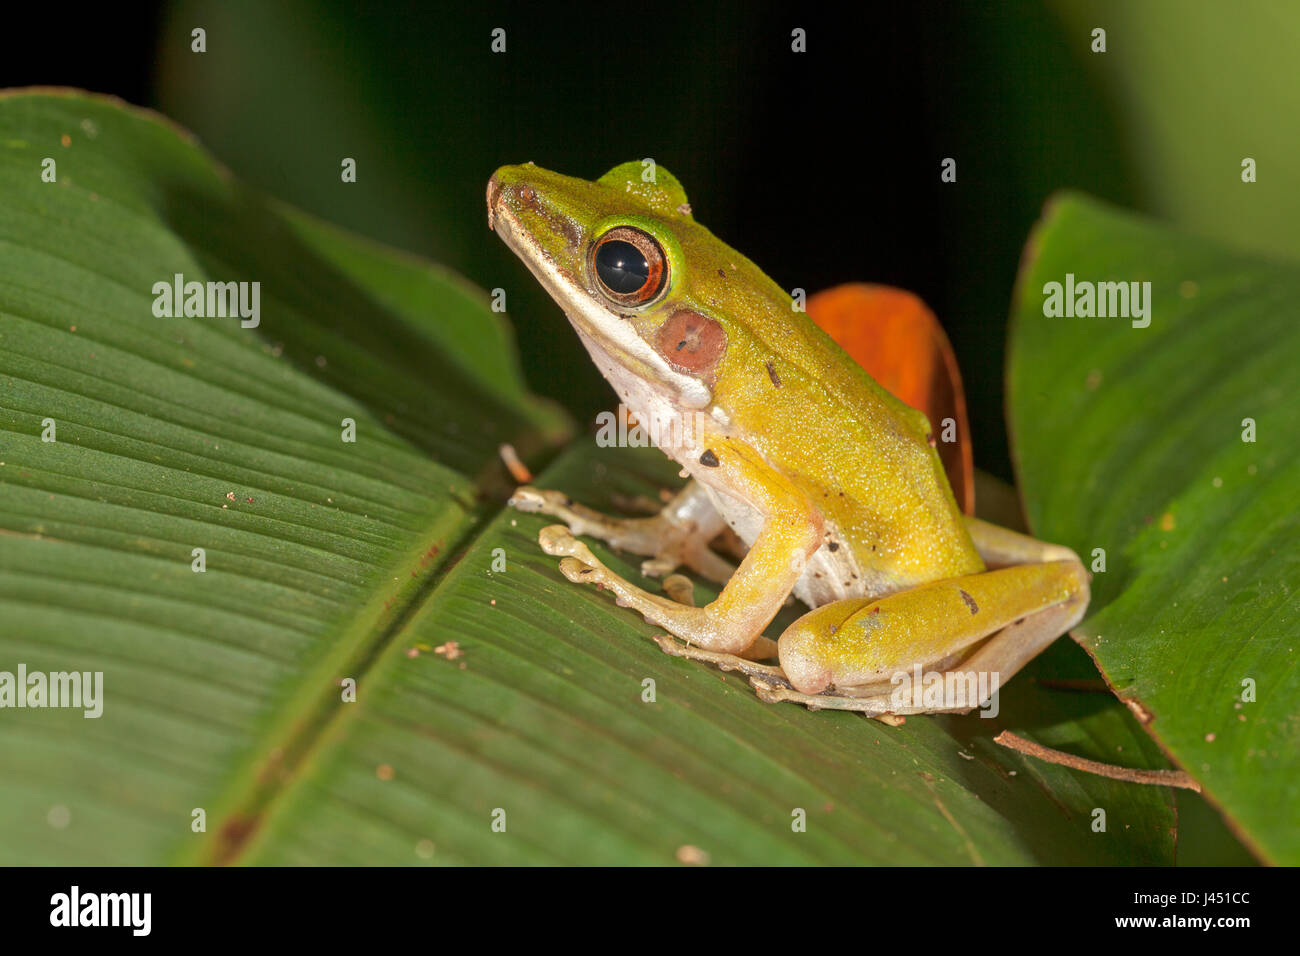 photo of a copper cheeked frog on a leaf Stock Photo